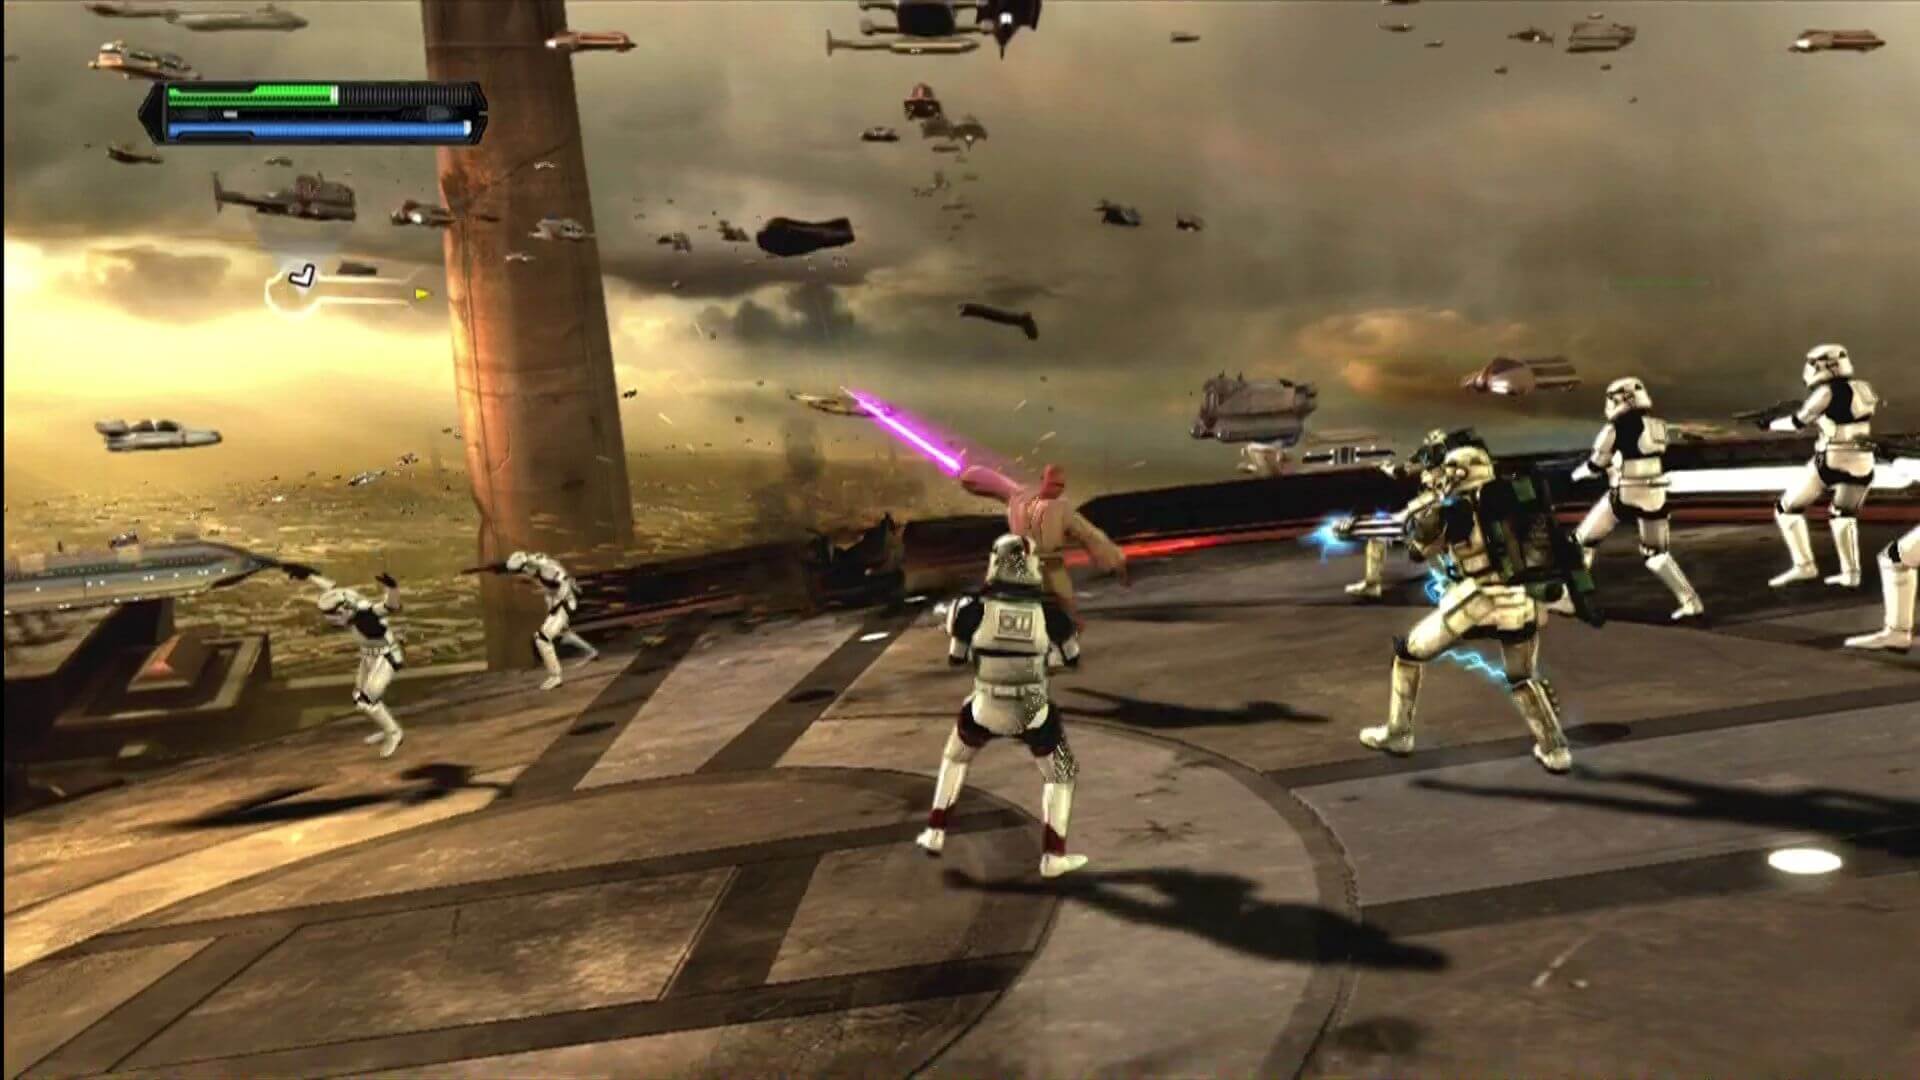 Star wars игры на русском. Стар ВАРС the Force unleashed 1. Star Wars the Force unleashed Xbox 360. Игра Star Wars unleashed 3. Star Wars Clone Wars игра PS 2.